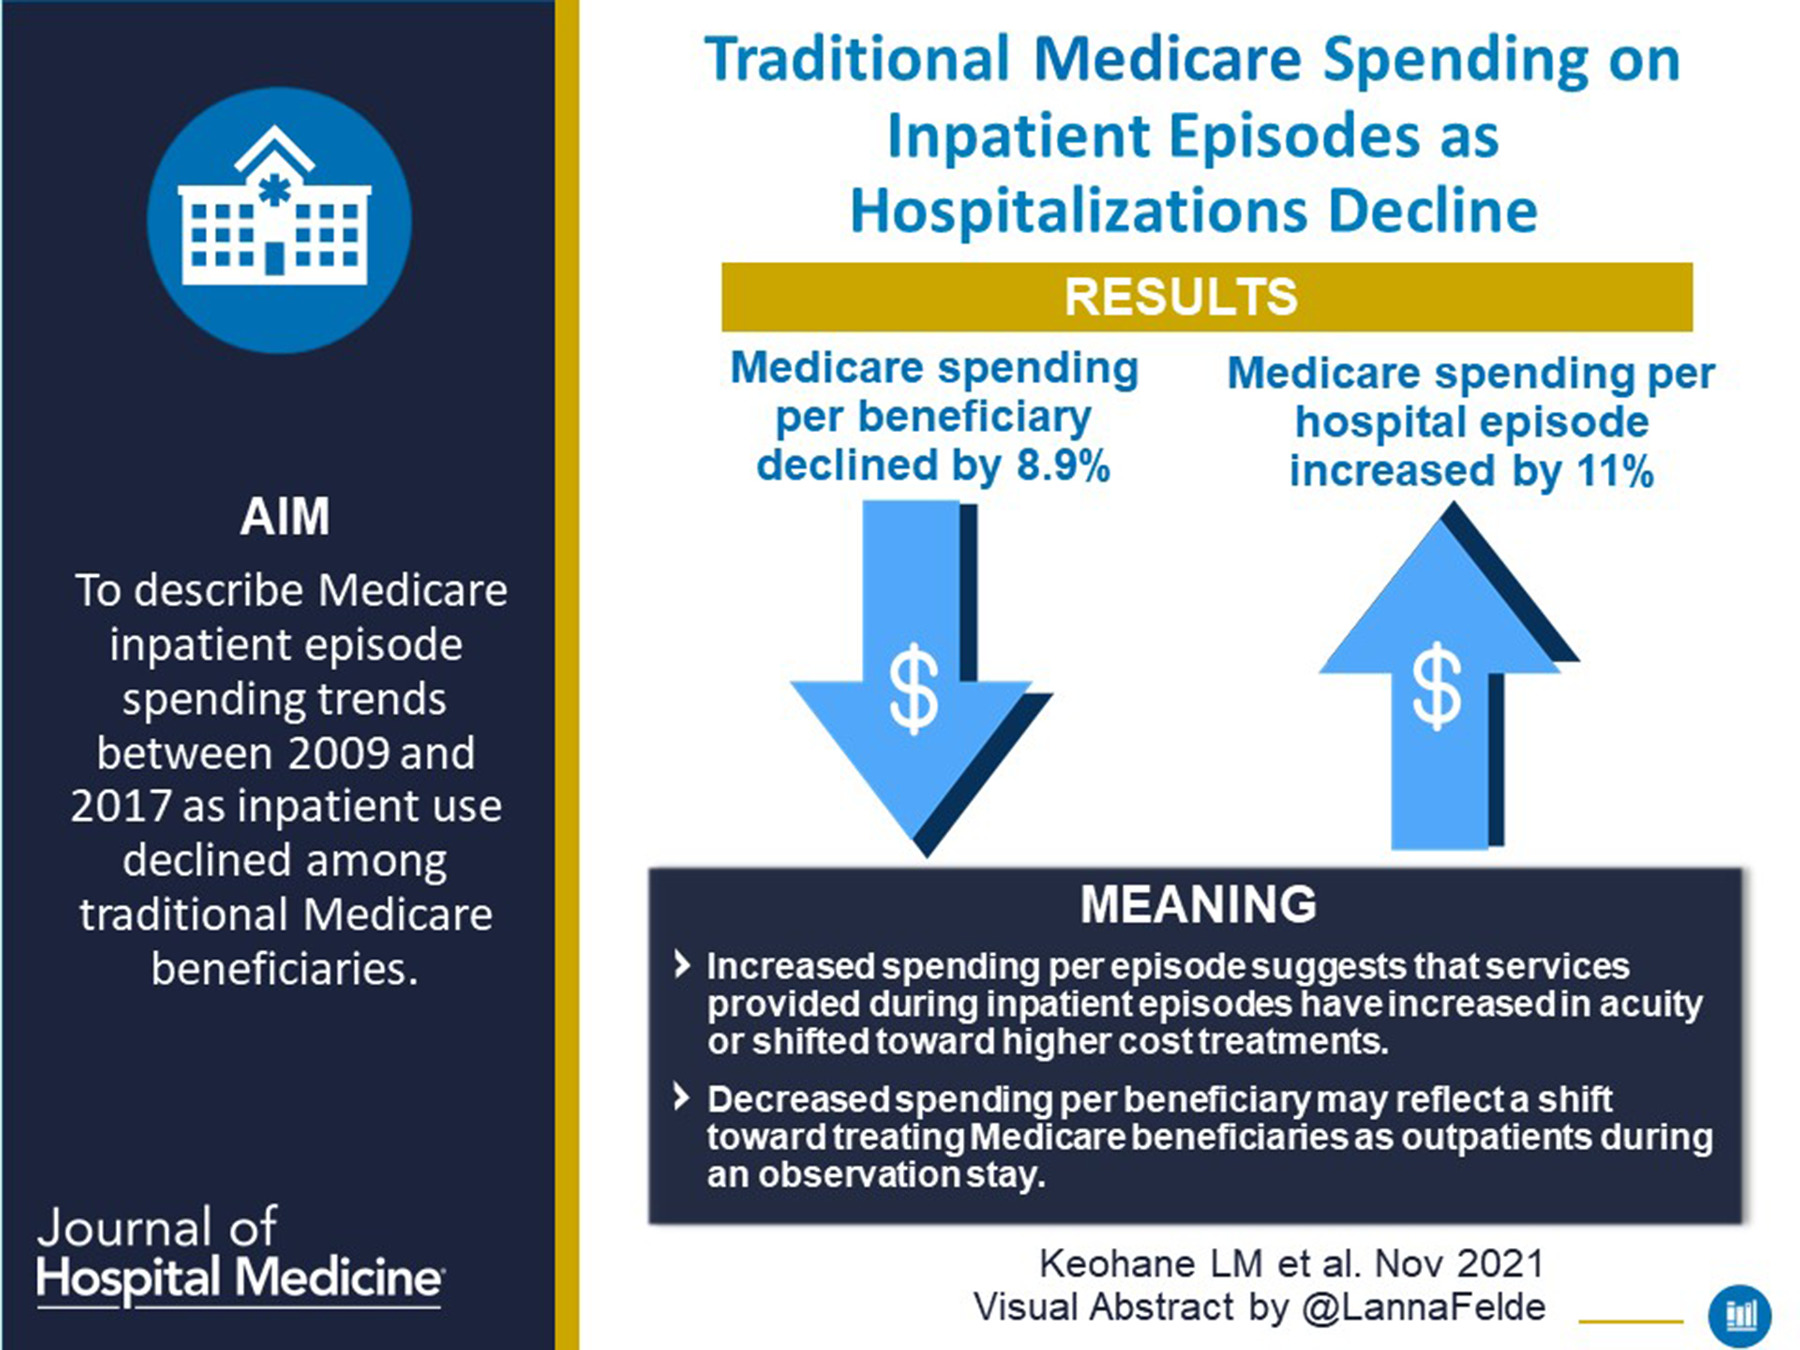 Traditional Medicare Spending on Inpatient Episodes as Hospitalizations Decline